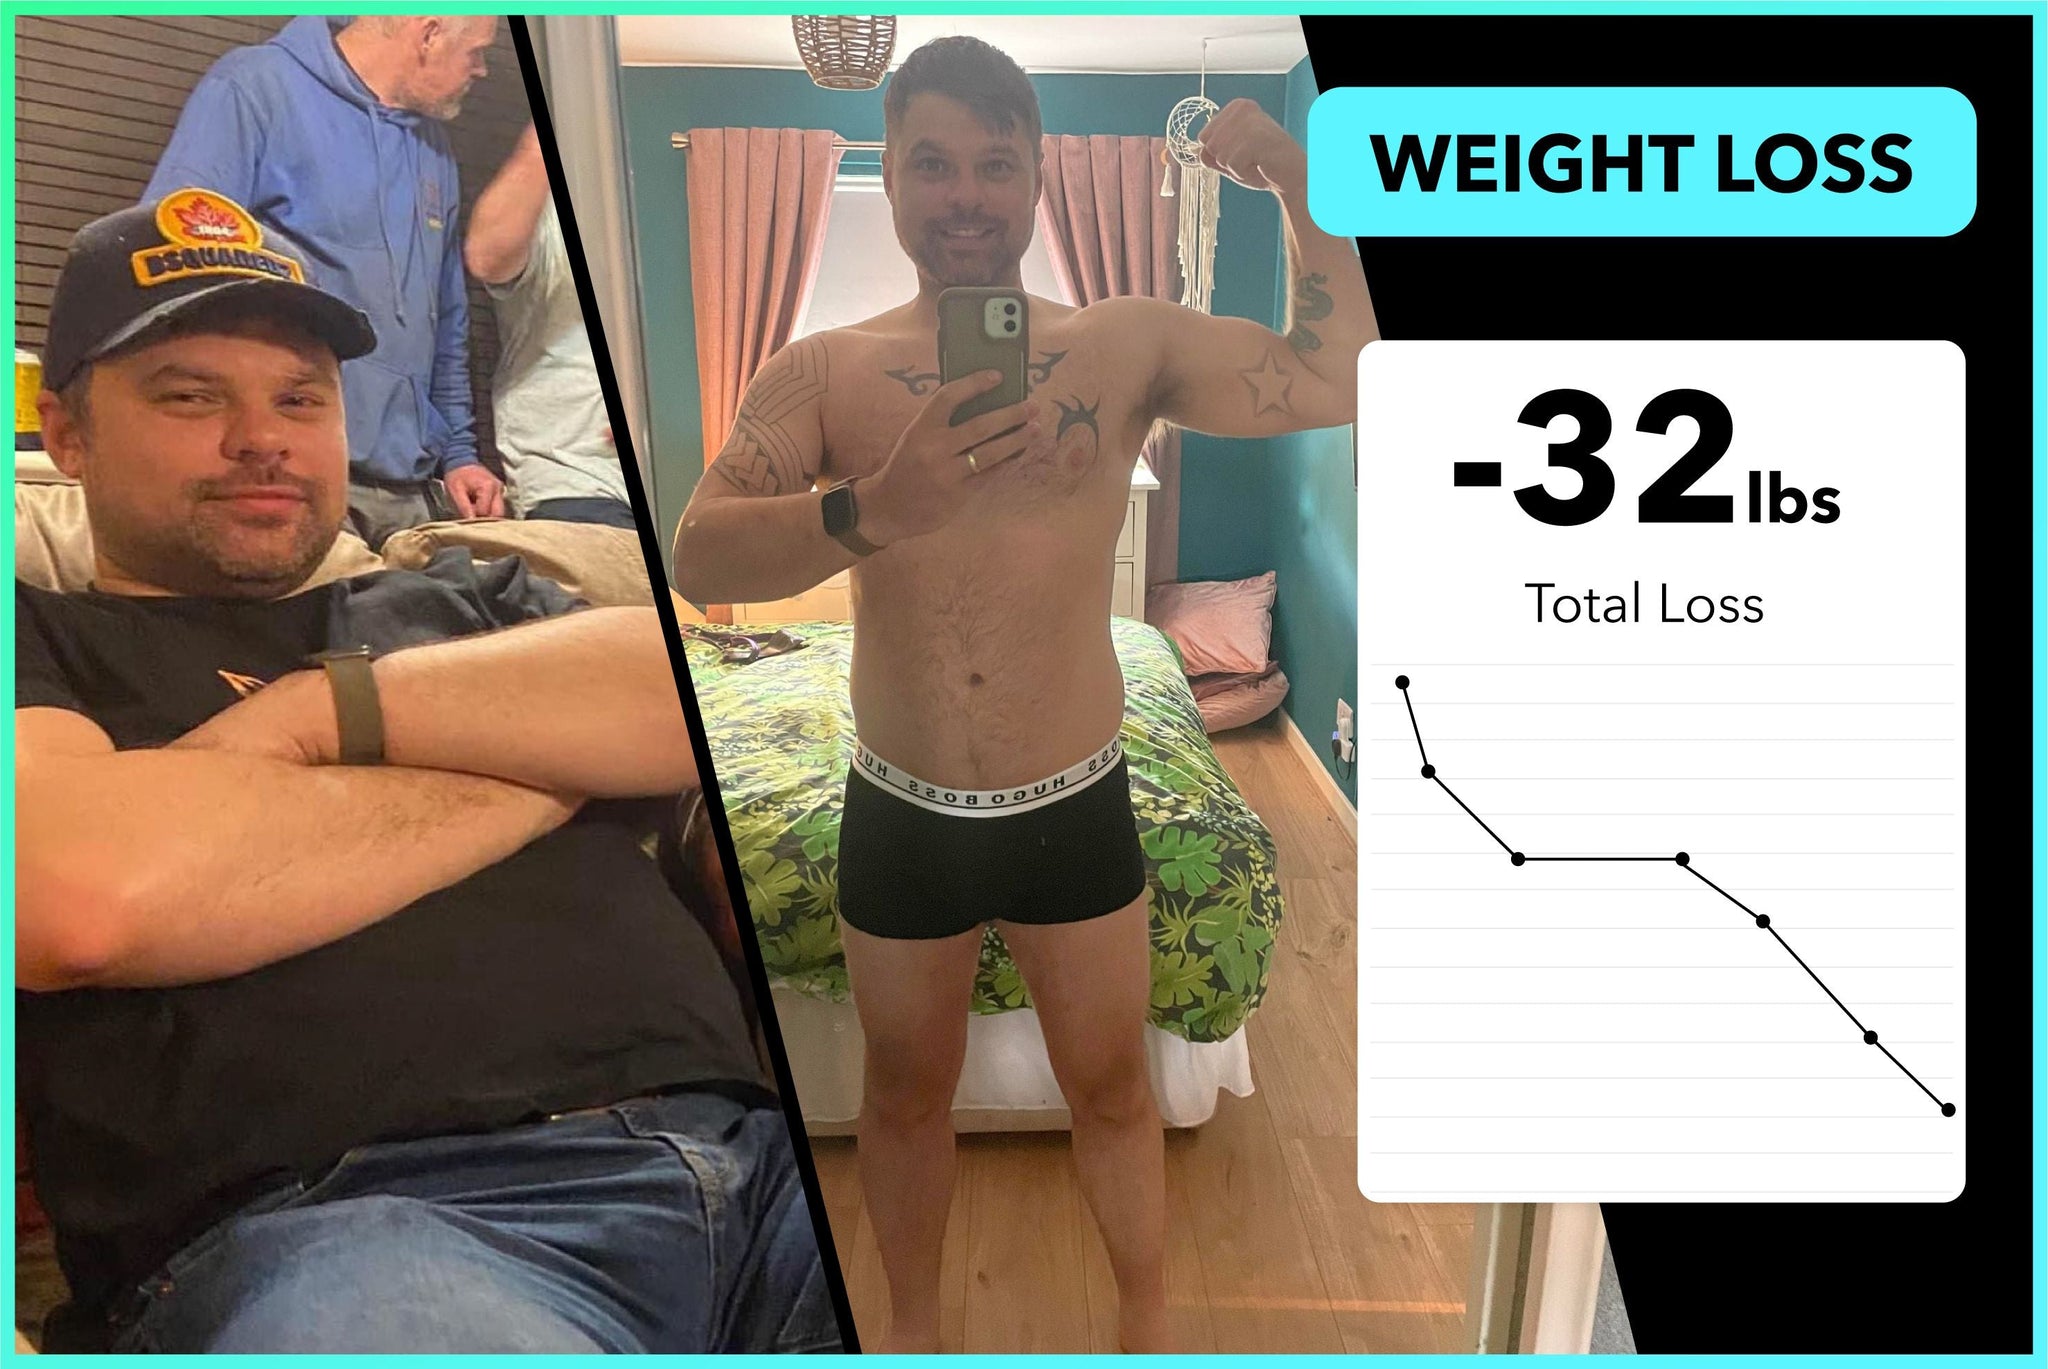 Lee has lost 32lbs with Team RH